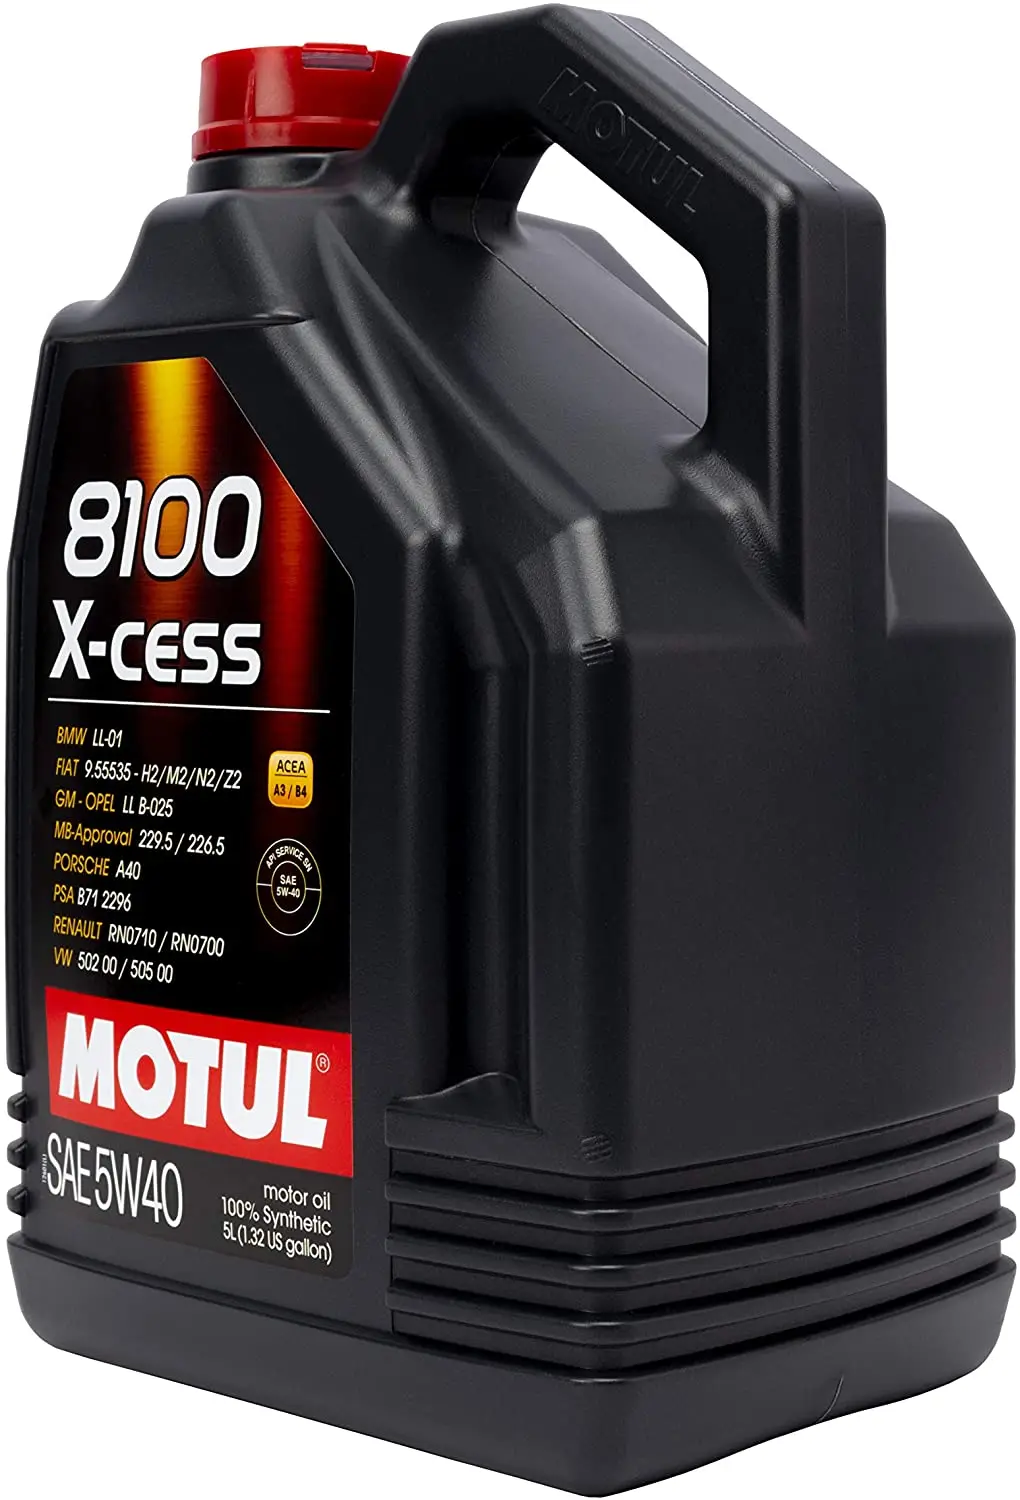 Motul Engine Oil 8100 X-cess 5w40 5 Litre Container, Petrol And